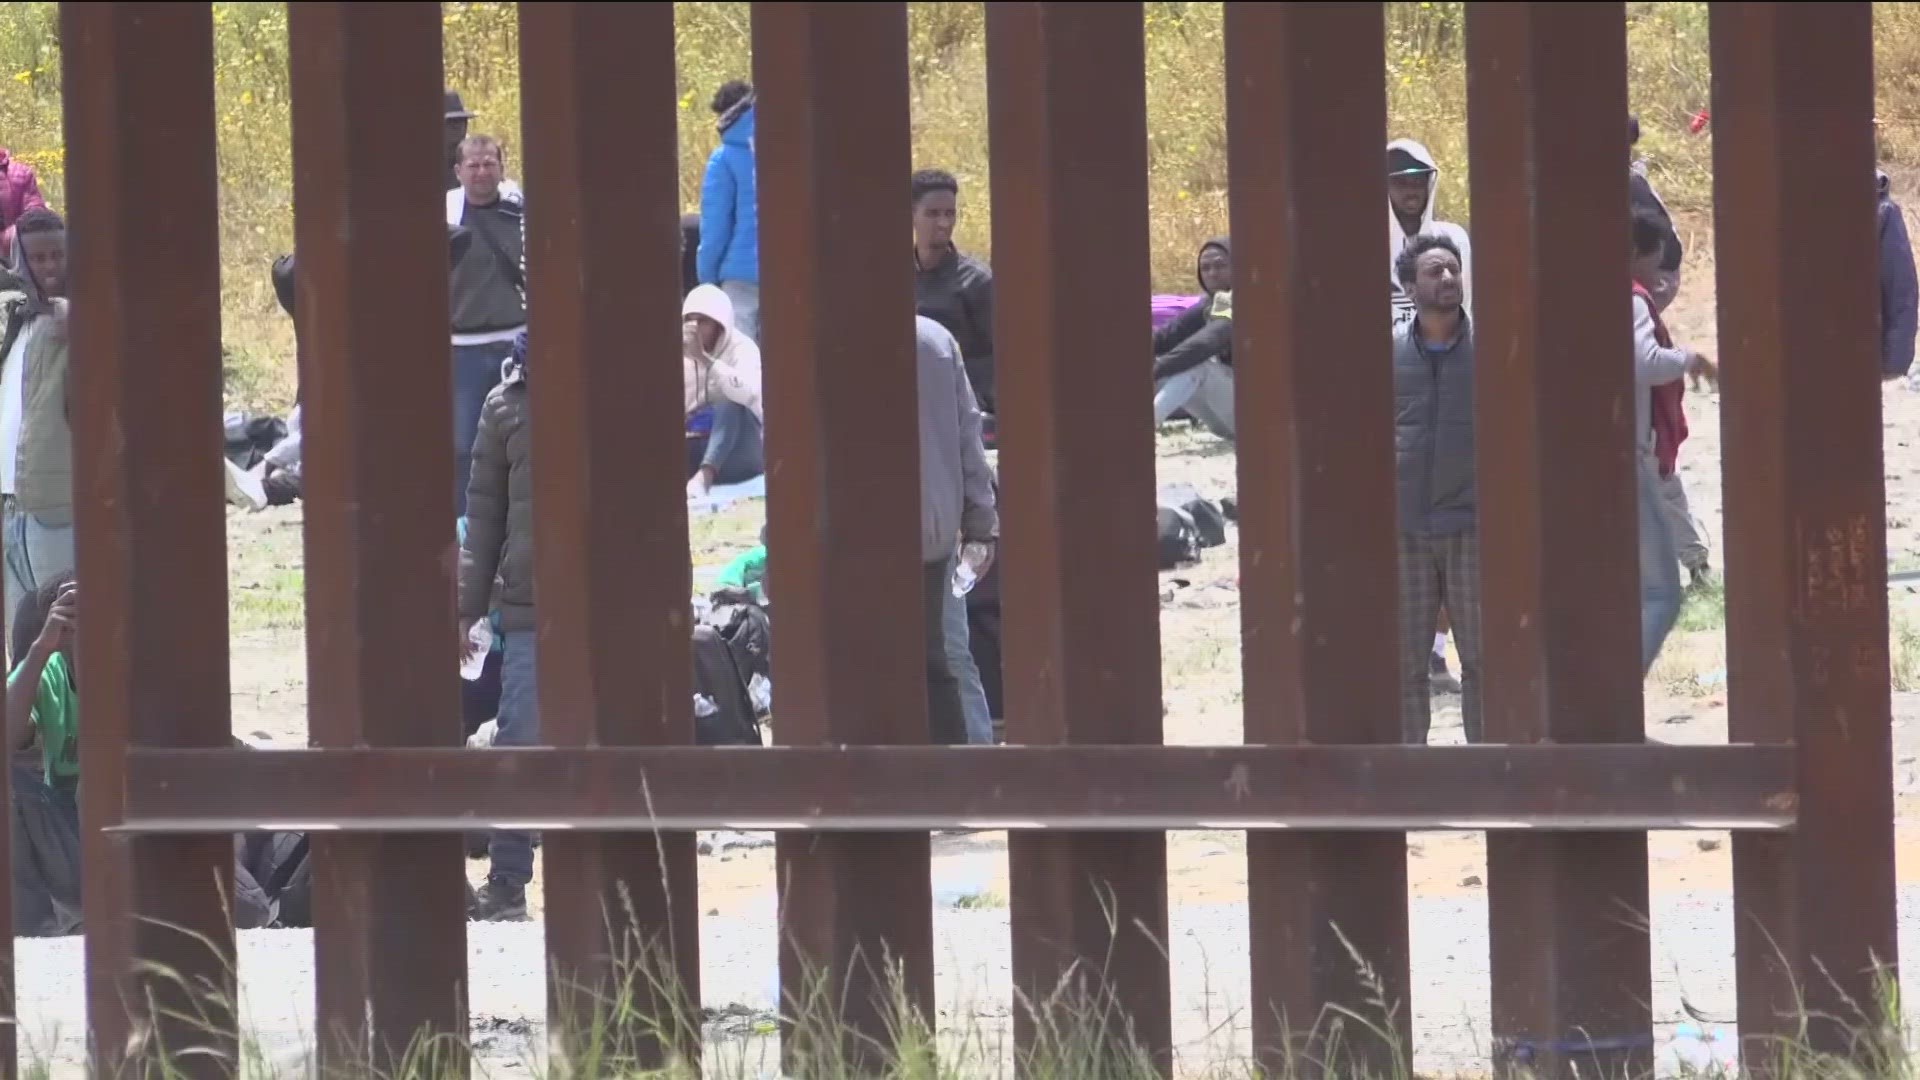 Hundreds Of Migrants Line Up At Border West Of San Ysidro Ahead Of Title 42 Expiration 